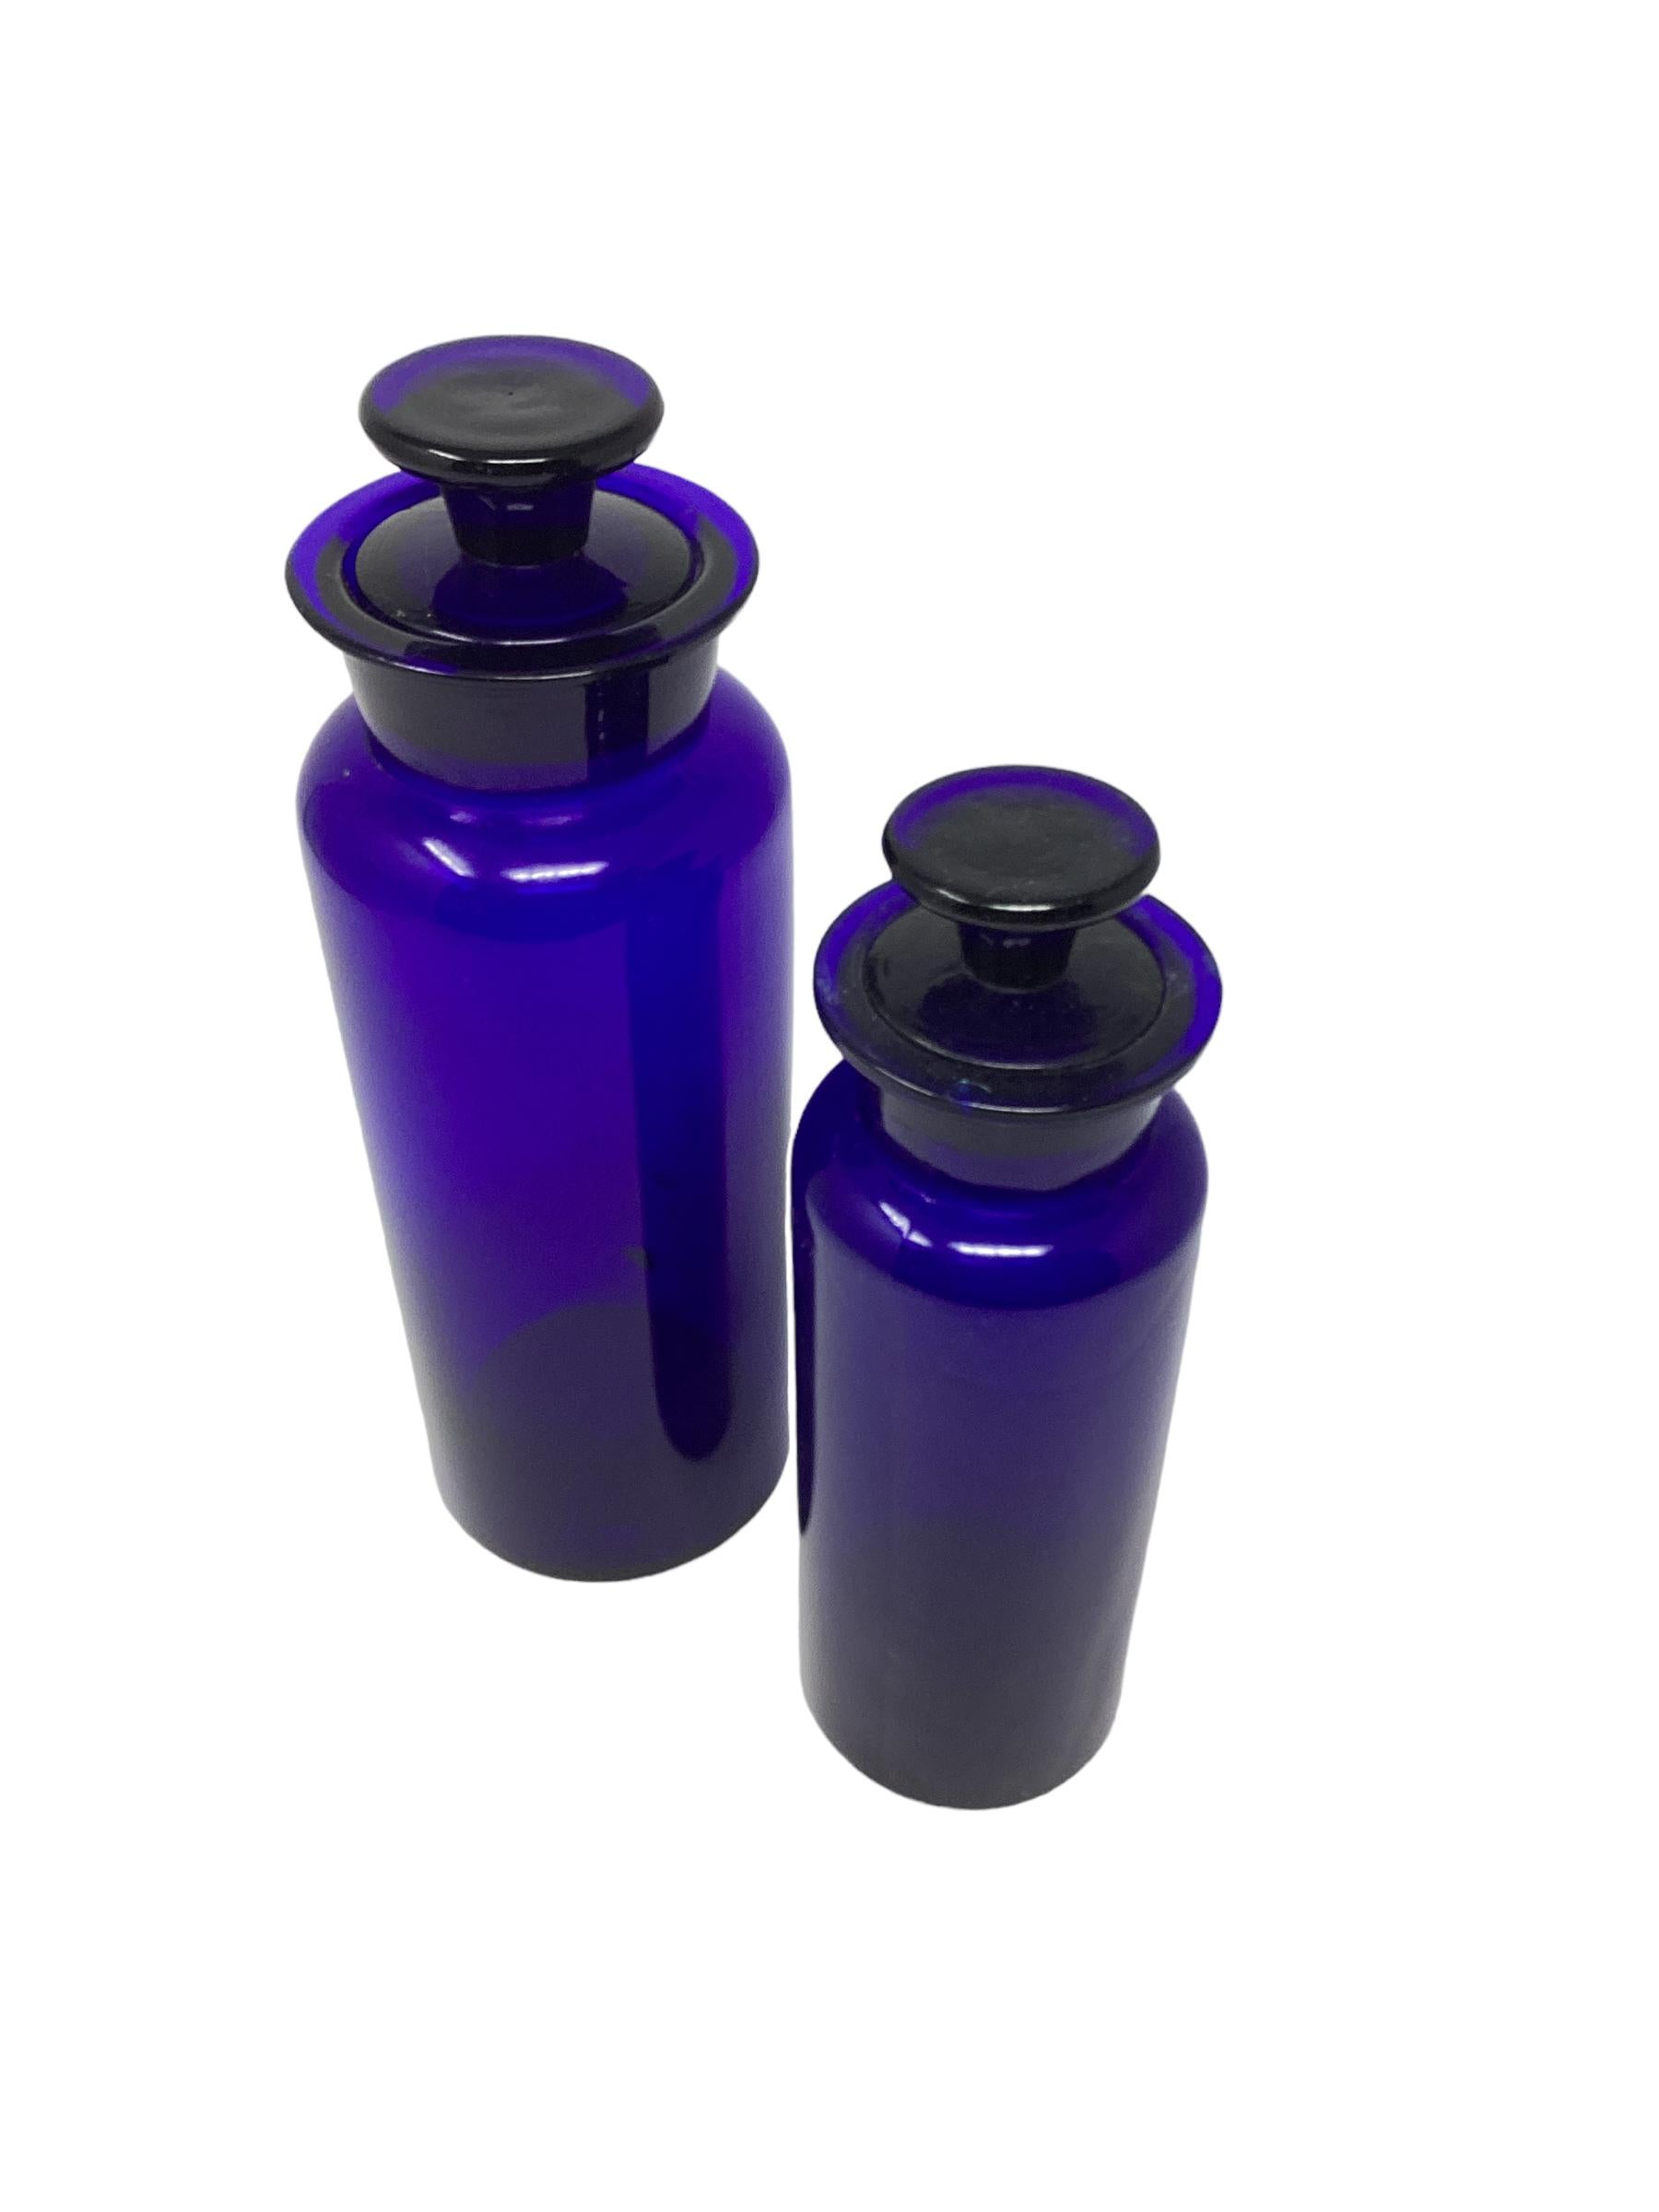 Set of Vintage Cylindrical English Cobalt Blue Apothecary Jars . The bigger one measures 10” x 3.5” and the smaller one is 8.5” x 2.75. Both stoppers are stuck and do not come out.